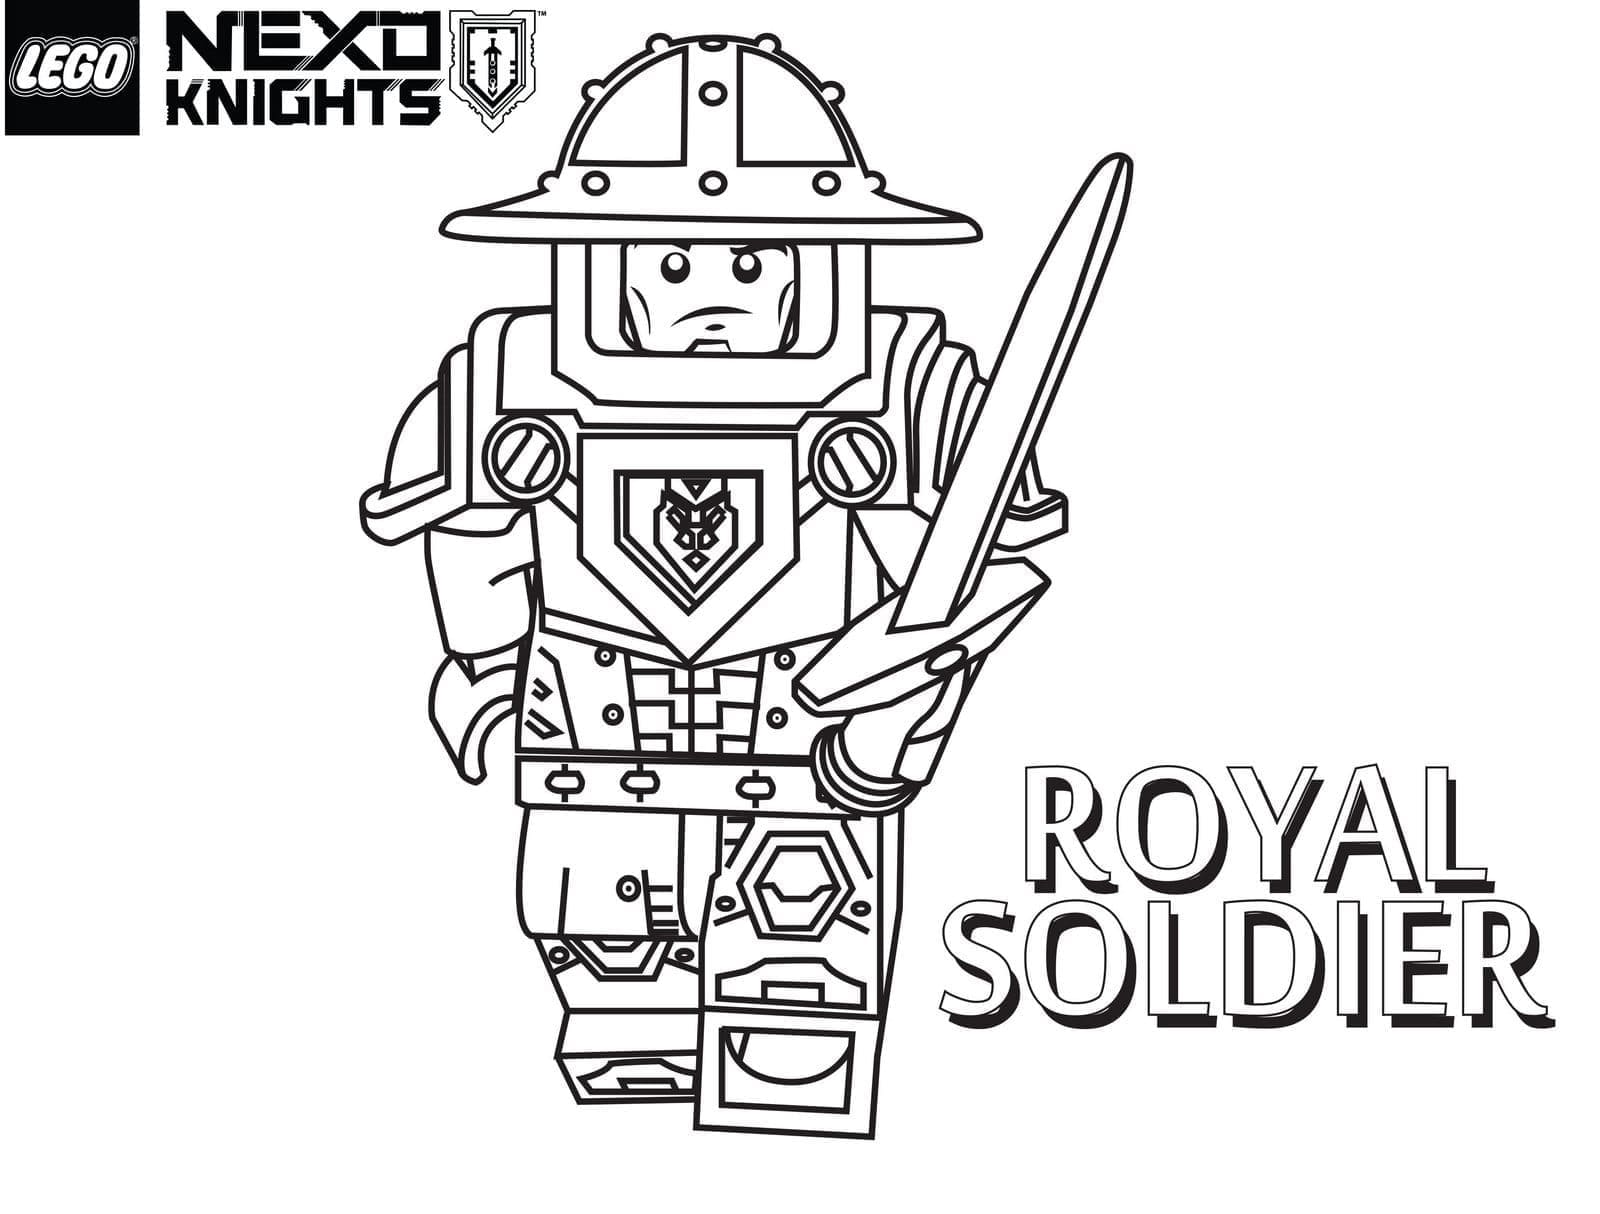 Lego Nexo Knights Royal Soldier coloring page